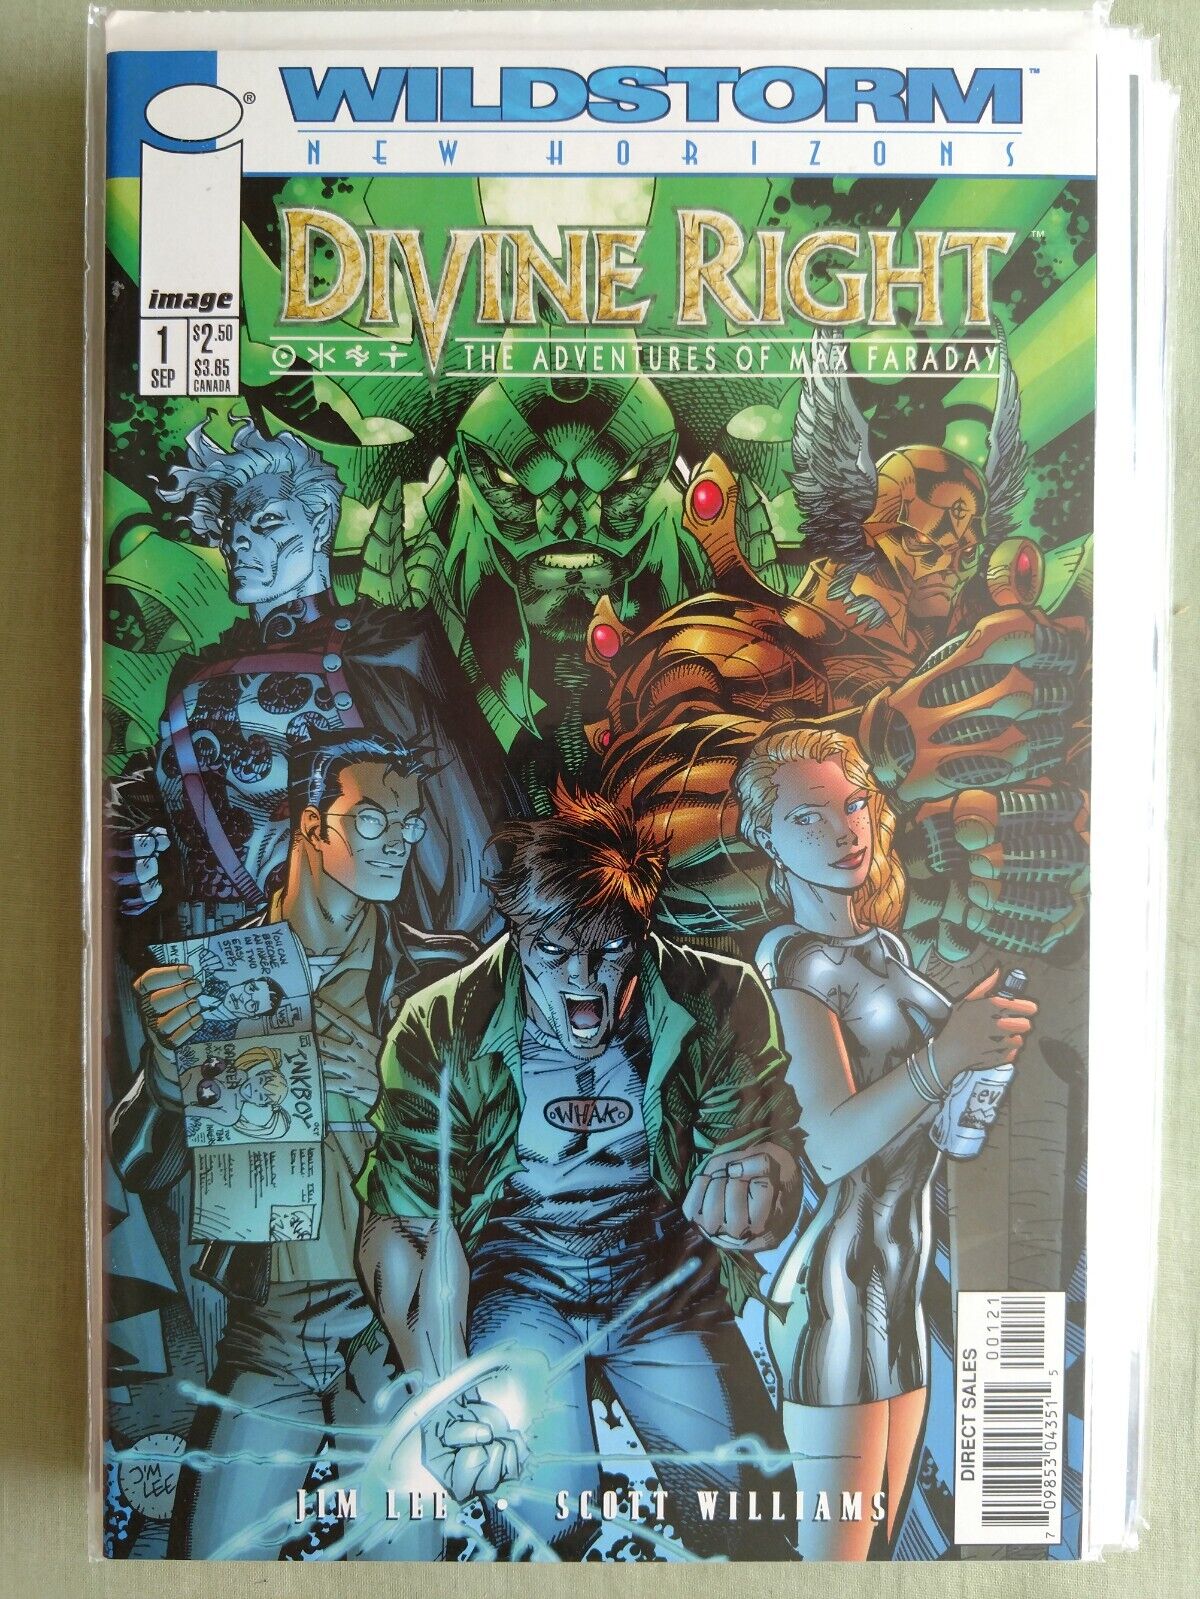 Divine Right: The Adventures of Max Faraday #1